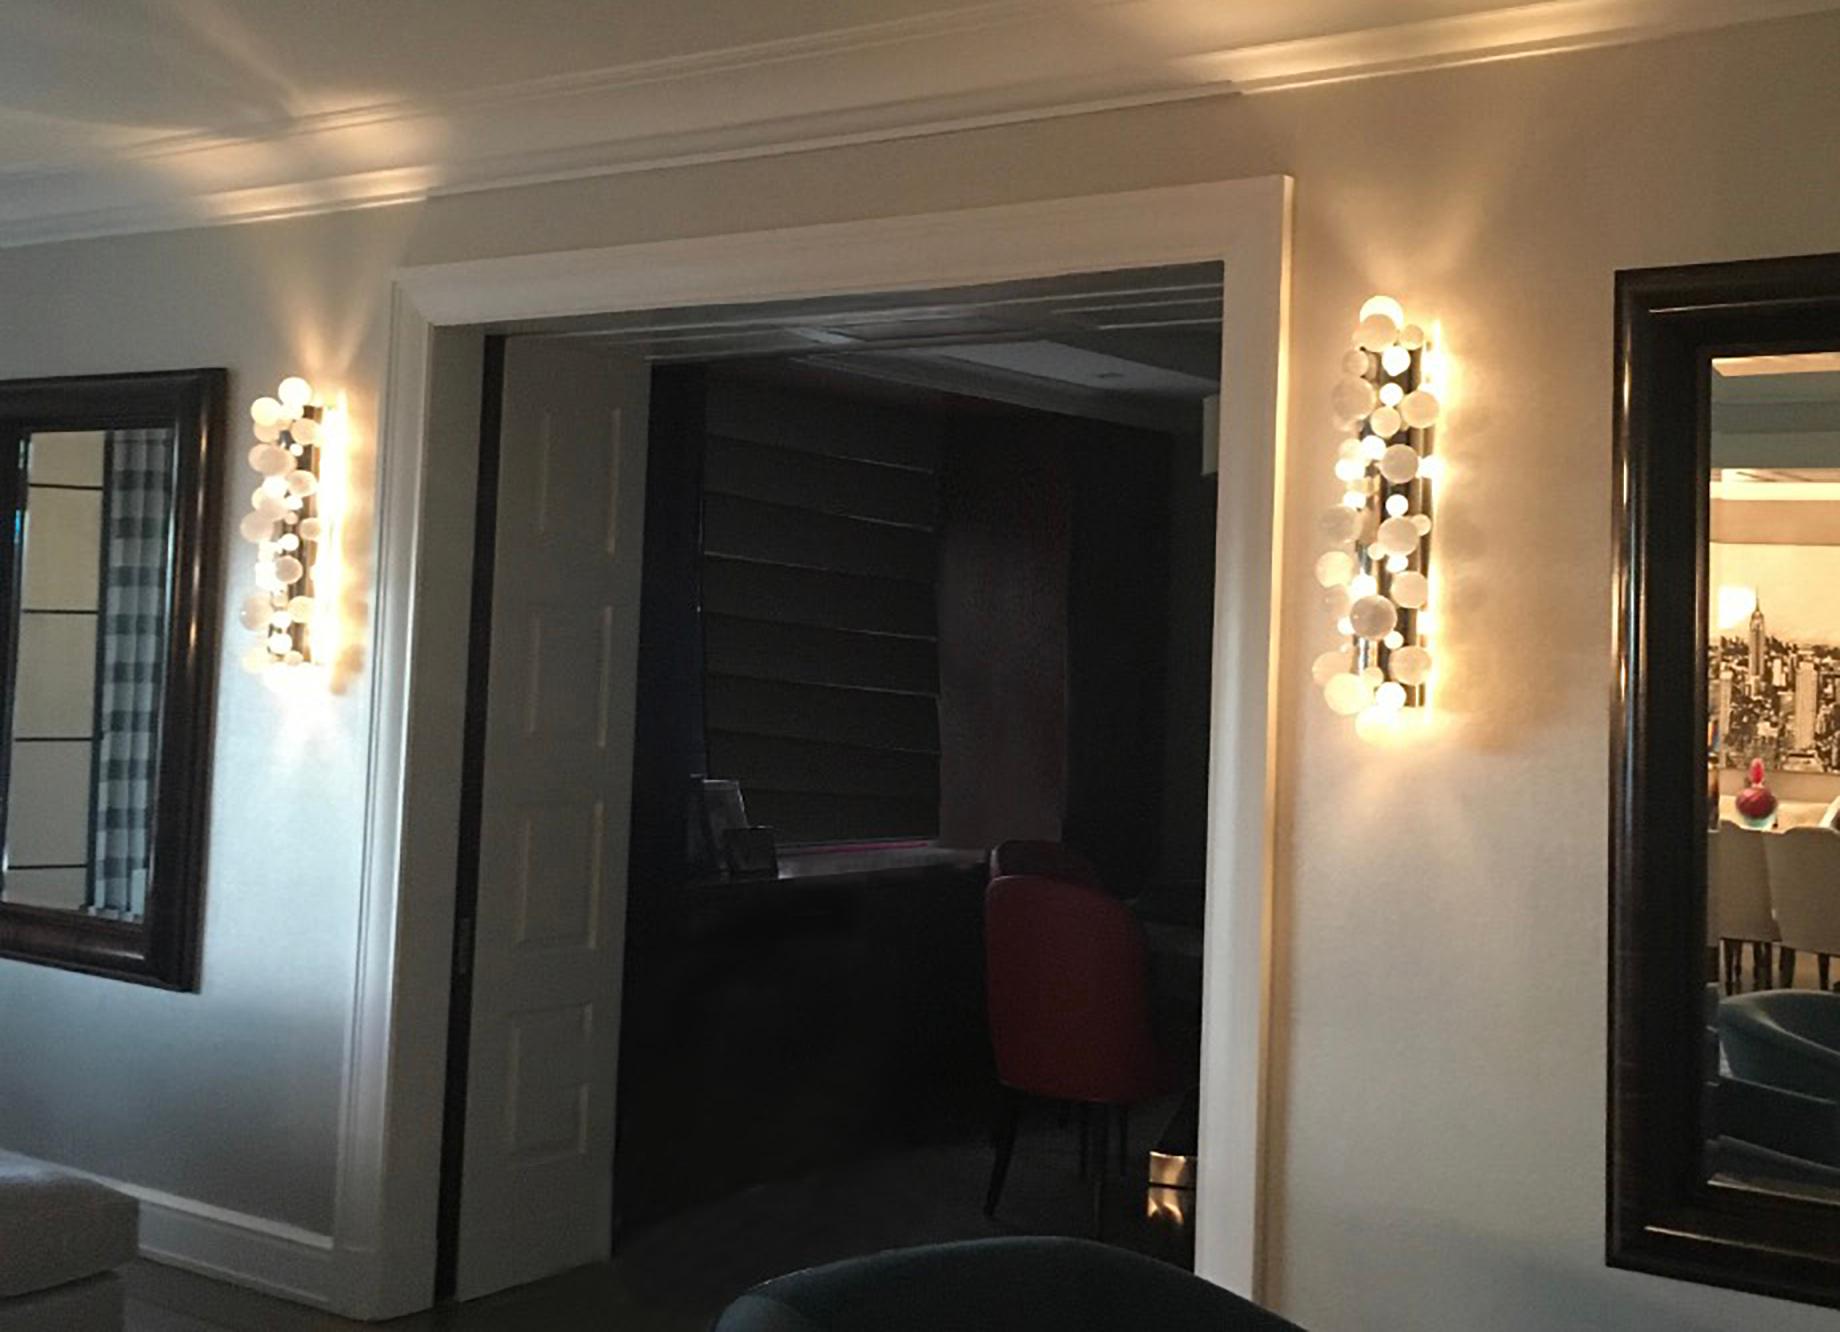 Pair of bubble rock crystal sconces with the polish nickel mounted. Created by Phoenix gallery NYC.
Each sconce installed four sockets. Use four 60w LED warm light bulbs. Total 240w max. Light bulbs included.
Recommend J-box size 2